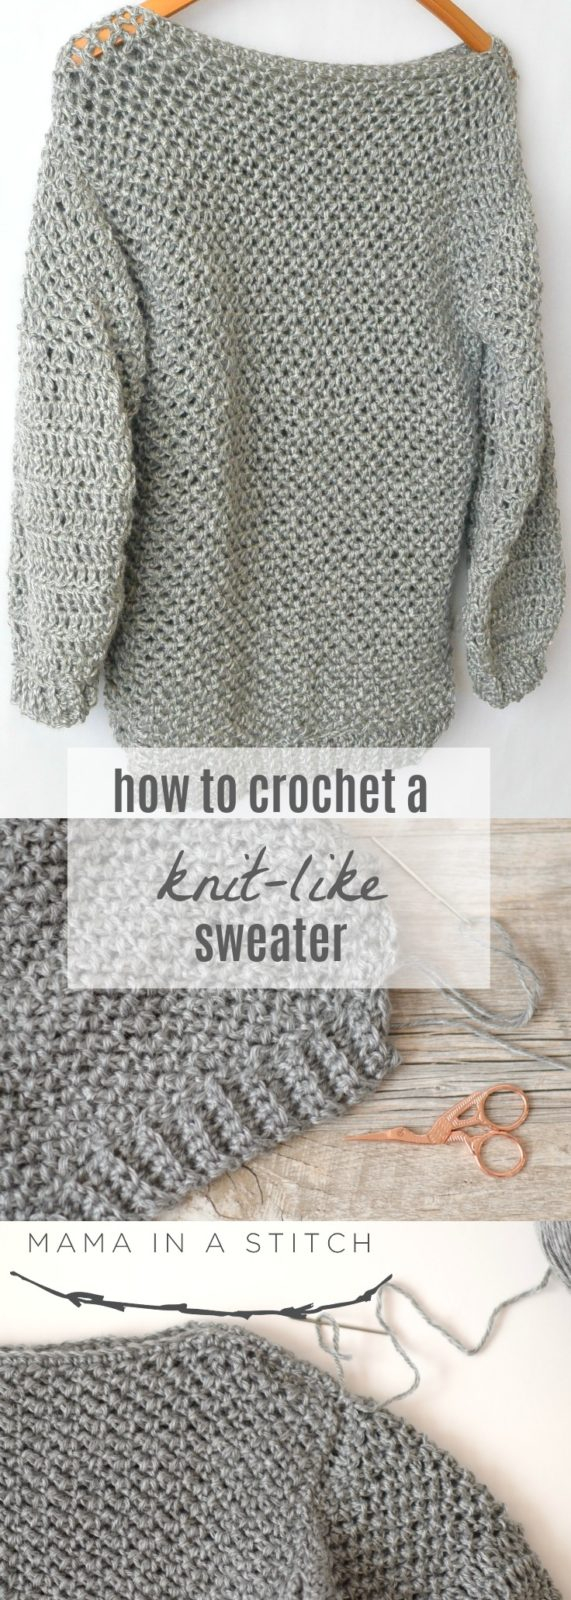 Easy Free Crochet Sweater Patterns How To Make An Easy Crocheted Sweater Knit Like Mama In A Stitch